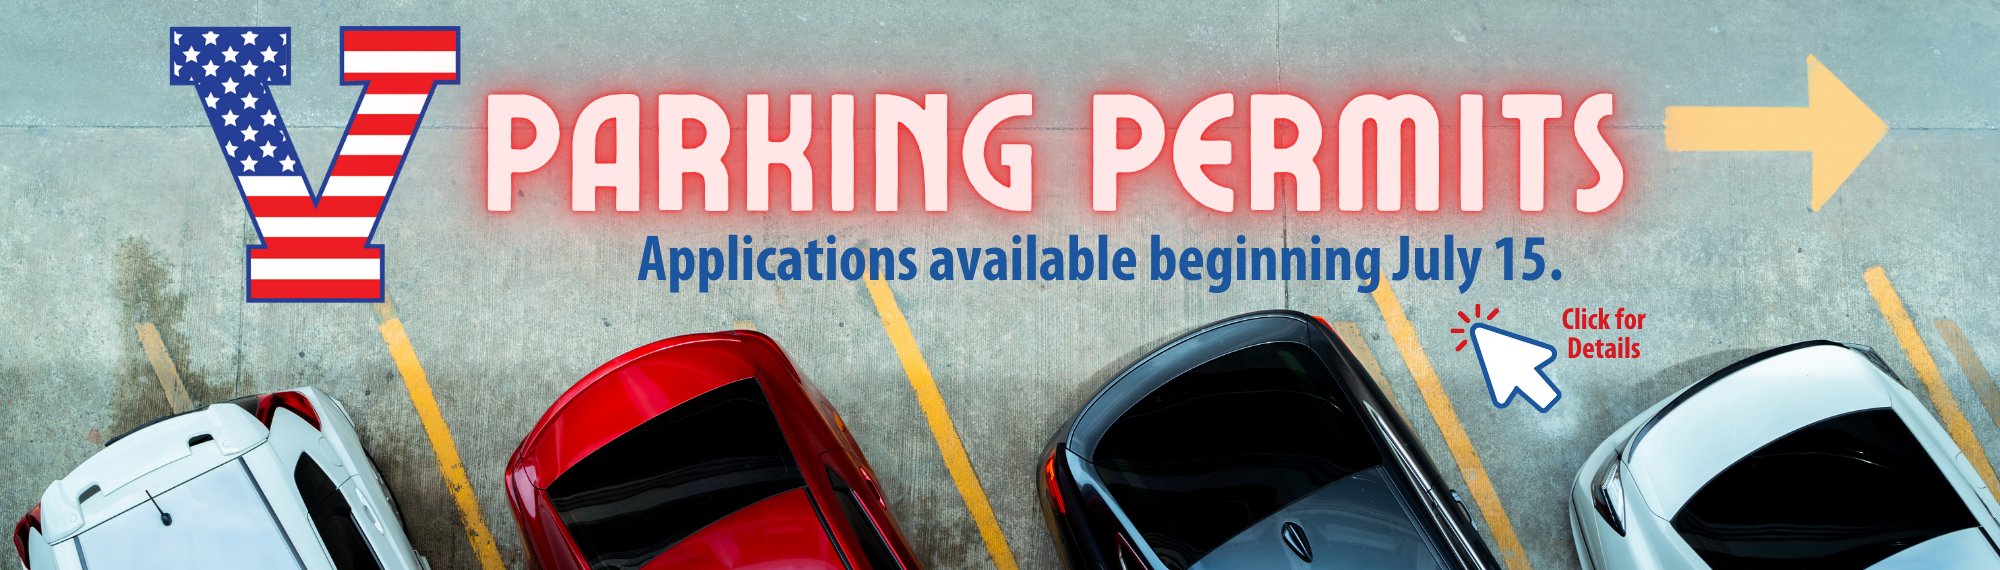 Parking Permits available beginning July 15.  Click for more information.